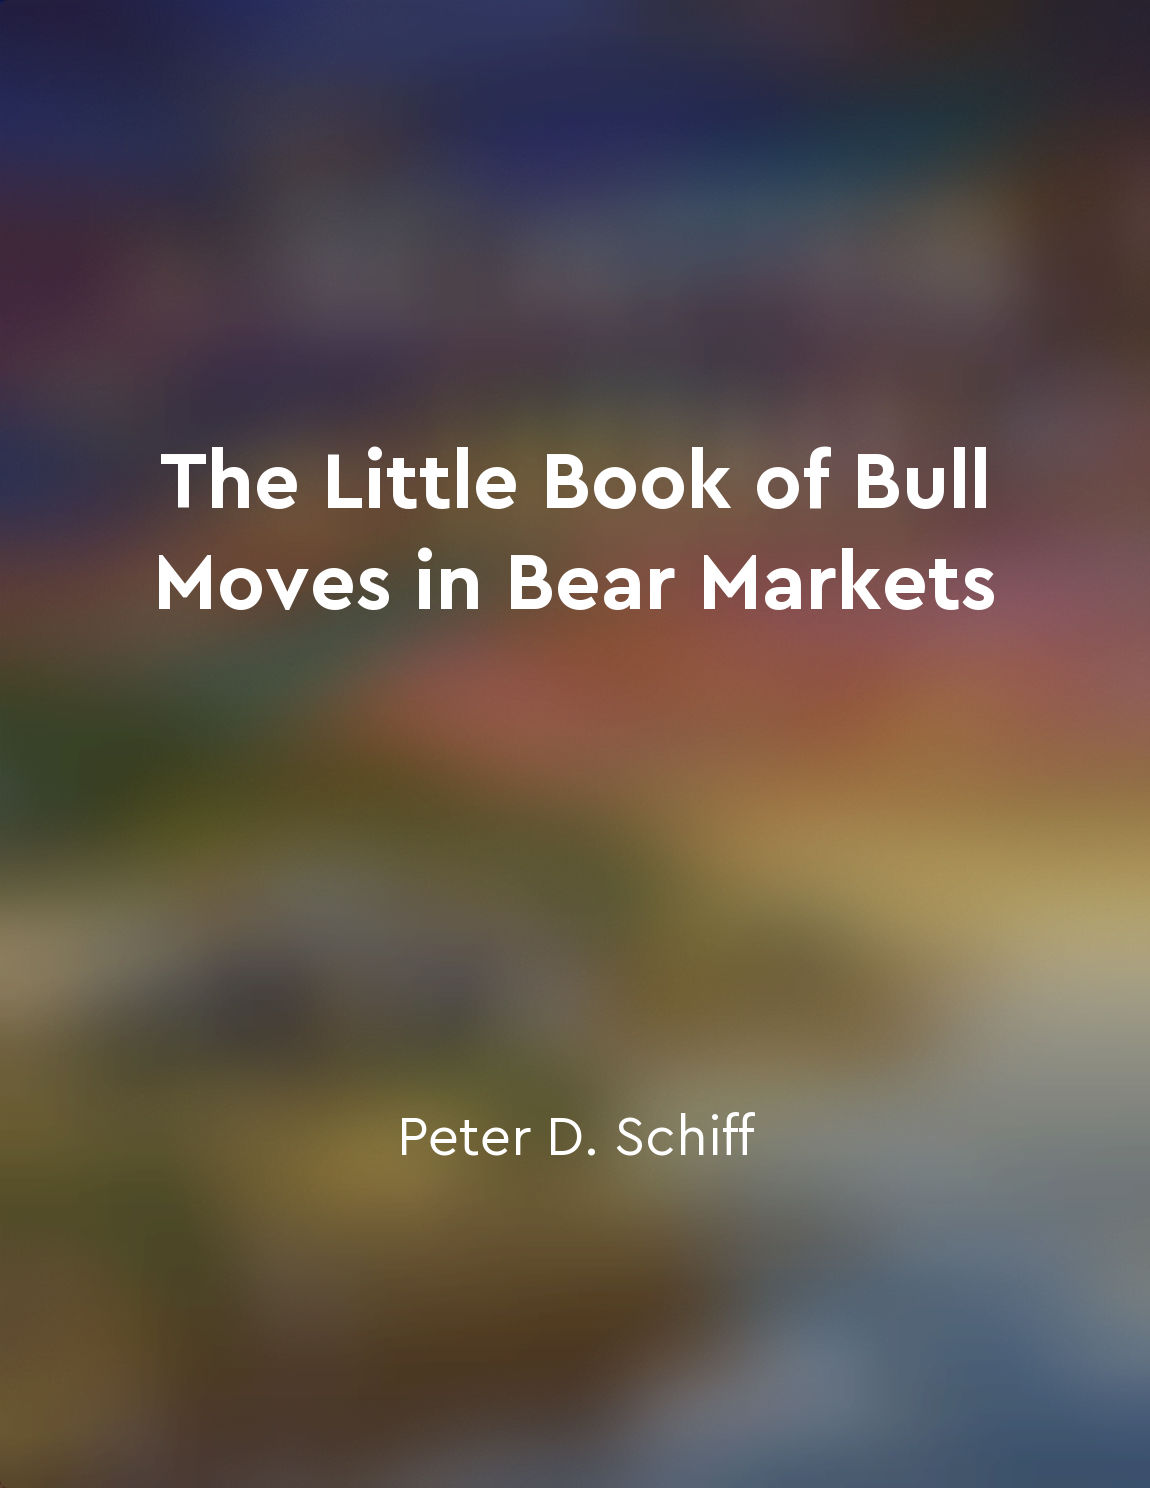 Market sentiment can be a powerful force in driving stock prices